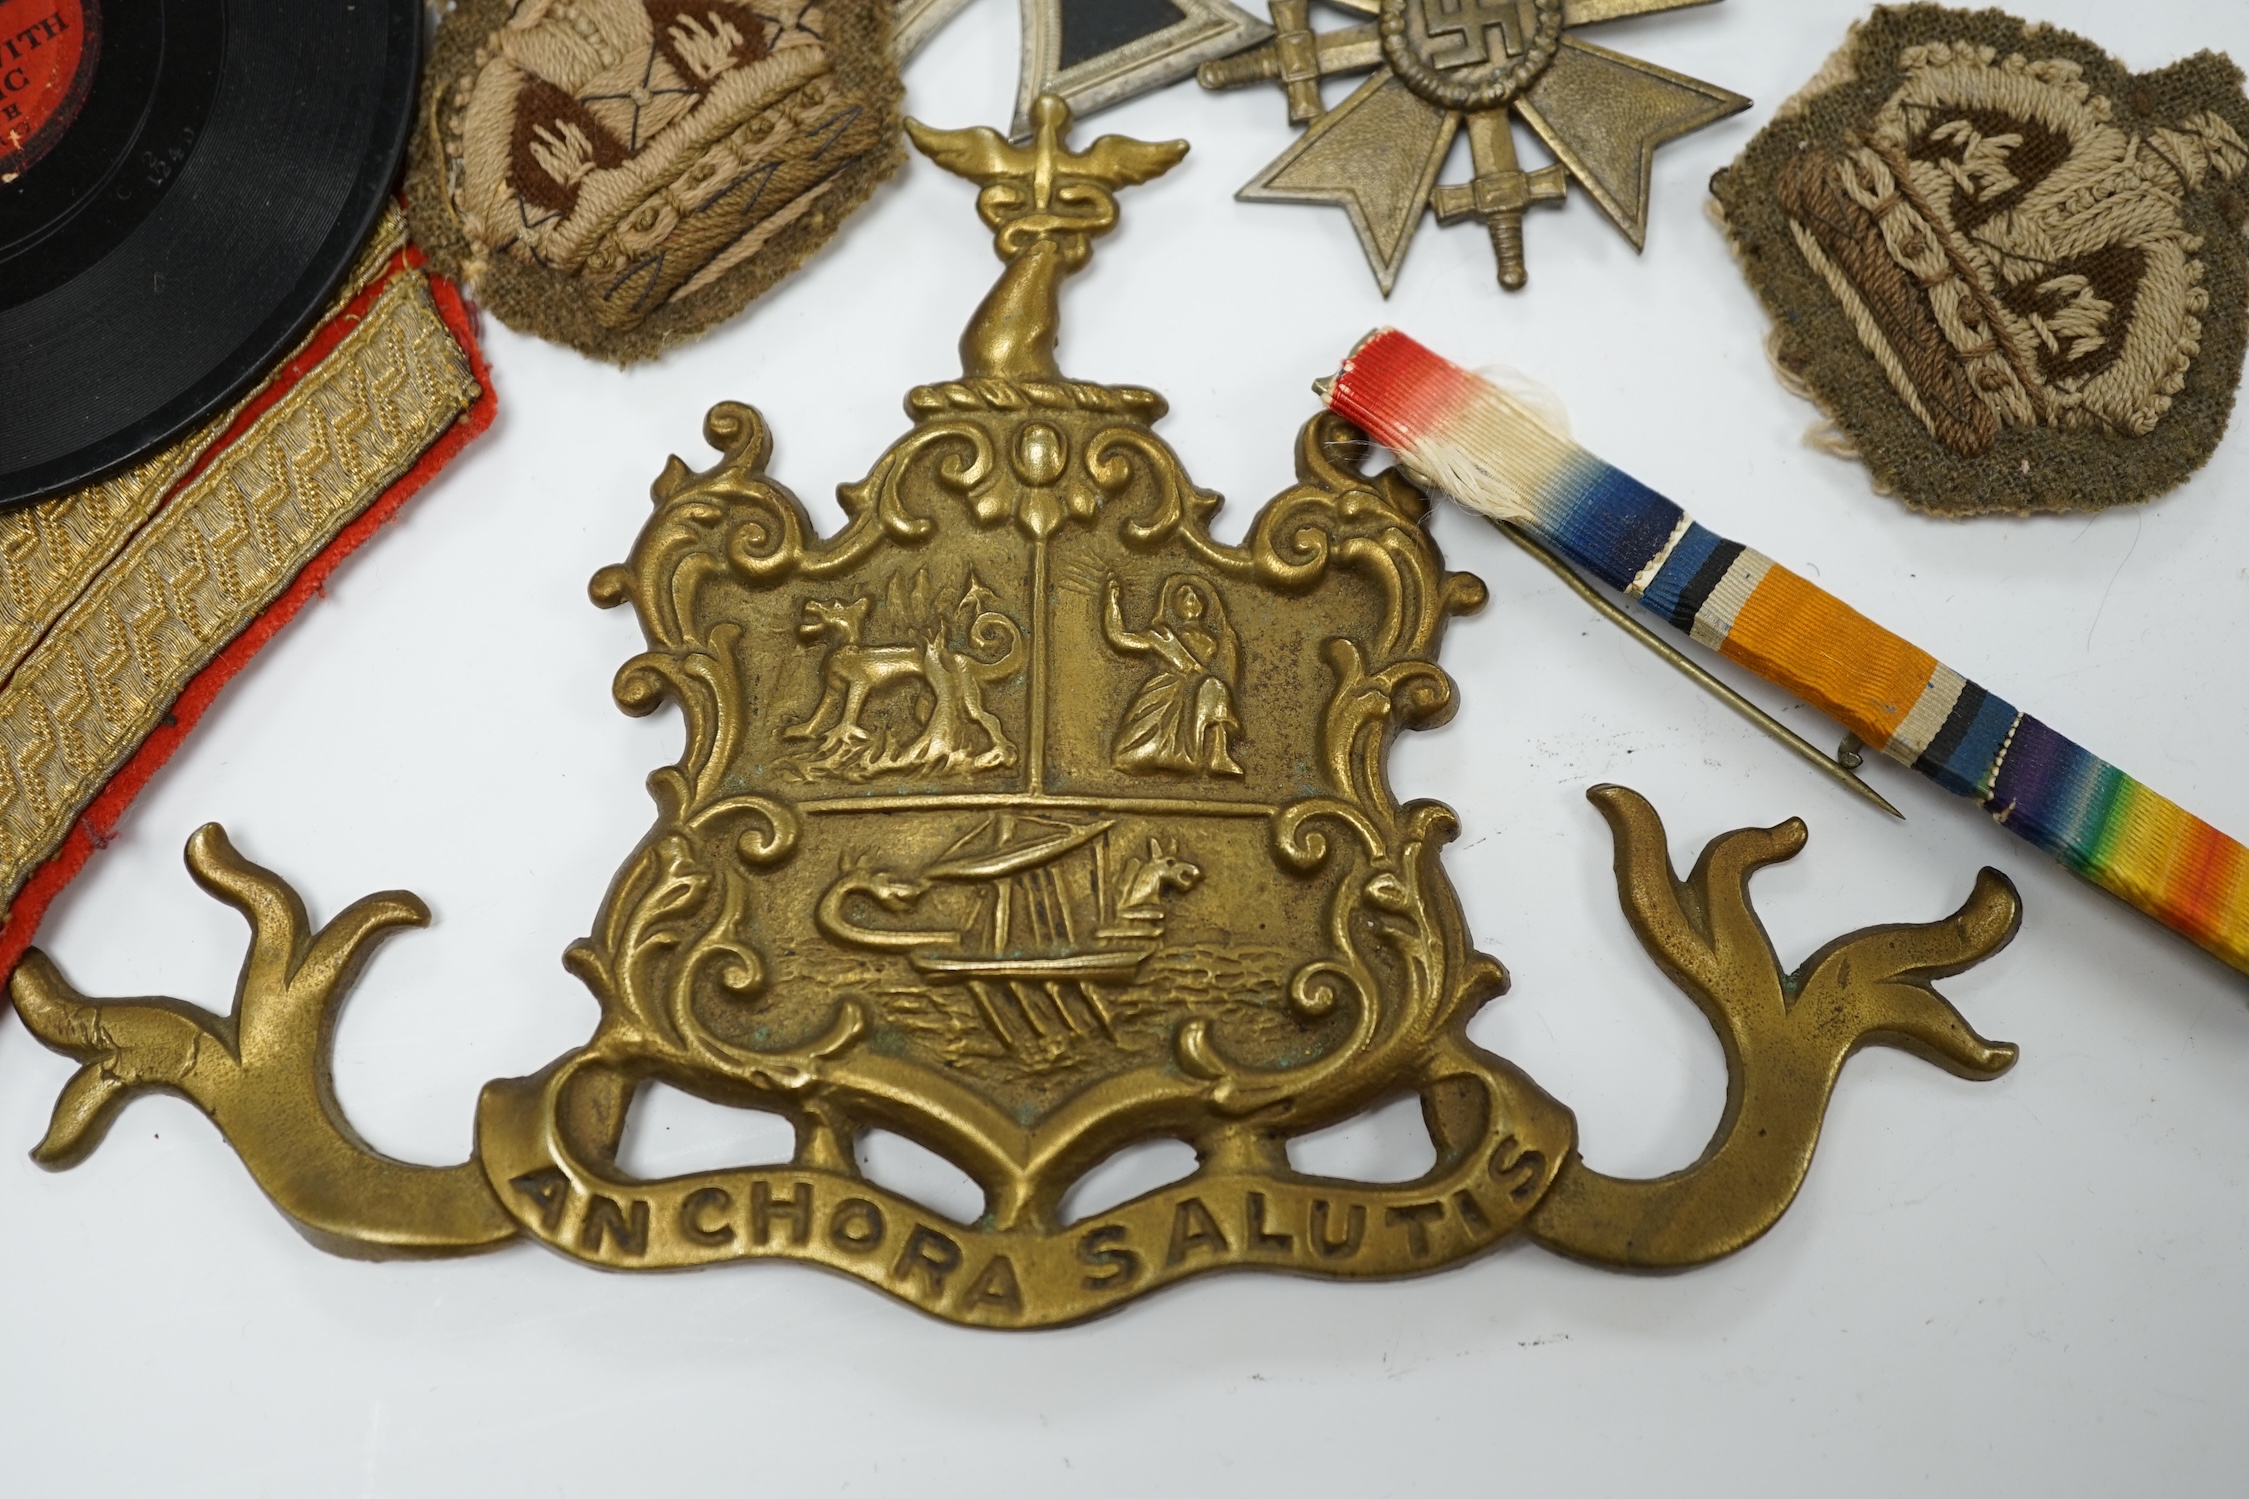 Three WWII German medals; a Second Class Iron Cross and two Merit Crosses, together with a brass naval related crest, a Metropolitan whistle, sergeant’s cloth titles, and other ephemera. Condition - fair